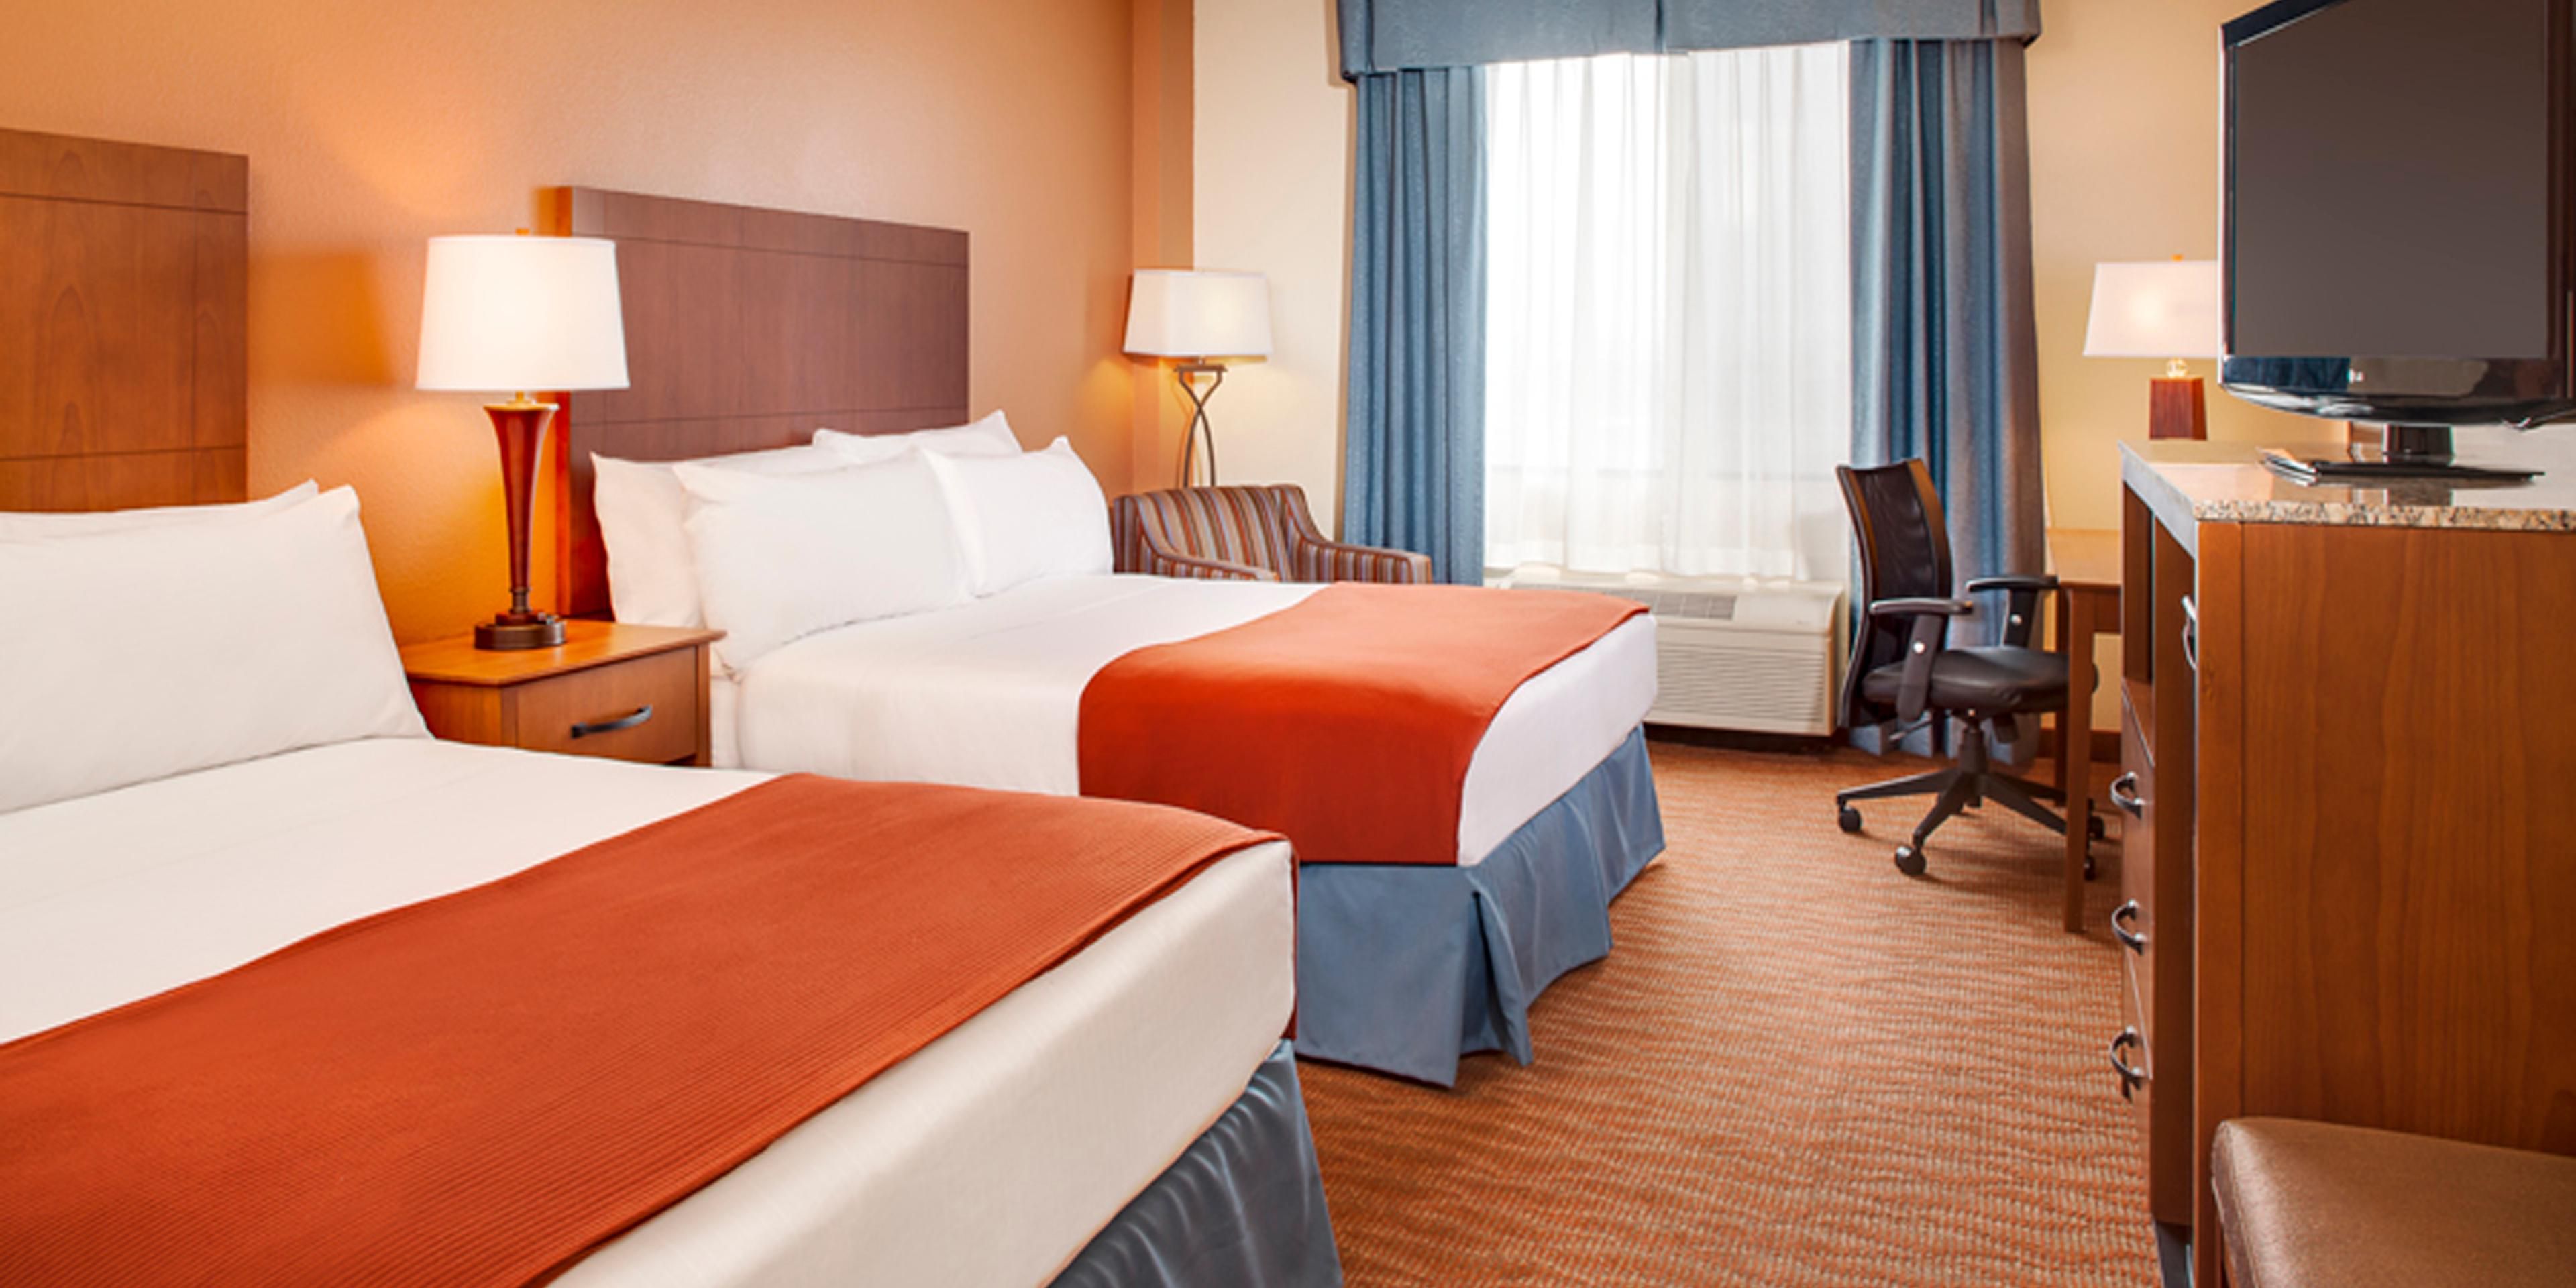 When choosing the Holiday Inn Express & Suites you choose a hotel with unbeatable guest service and hotel amenities such as free breakfast, and a pool with on-site fitness center. Our guest rooms feature luxurious bedding, spacious work space, complimentary Wi-Fi. Call one of our Sales Manager's today to book a block of rooms for your next event.